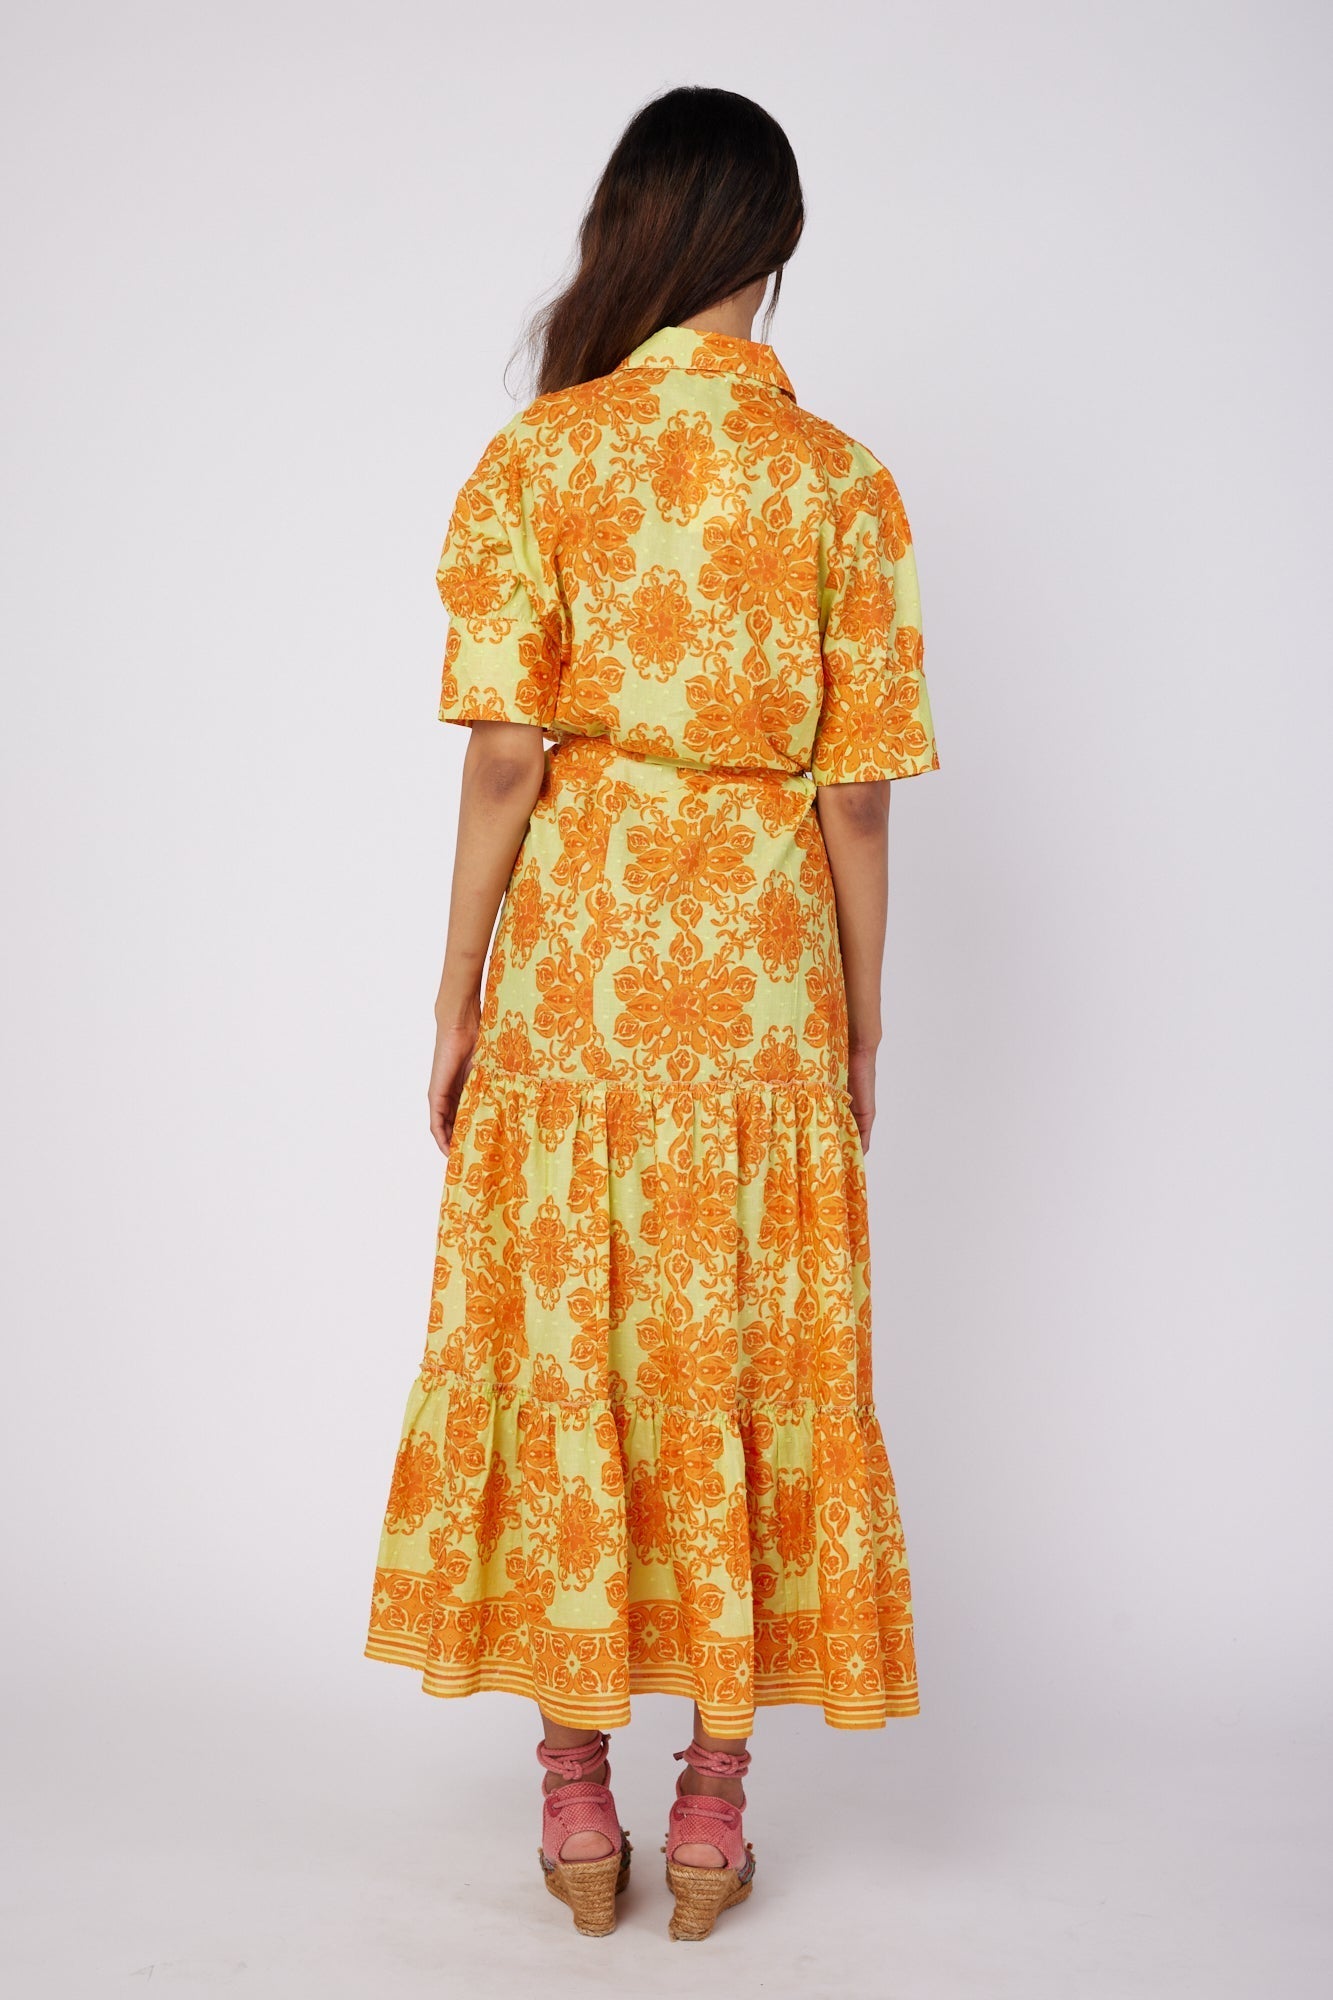 ModaPosa Alcee Short Puff Sleeve Maxi Dress with Collar and Detachable Belt in Curacao Majolica . Discover women's resort dresses and lifestyle clothing inspired by the Mediterranean. Free worldwide shipping available!